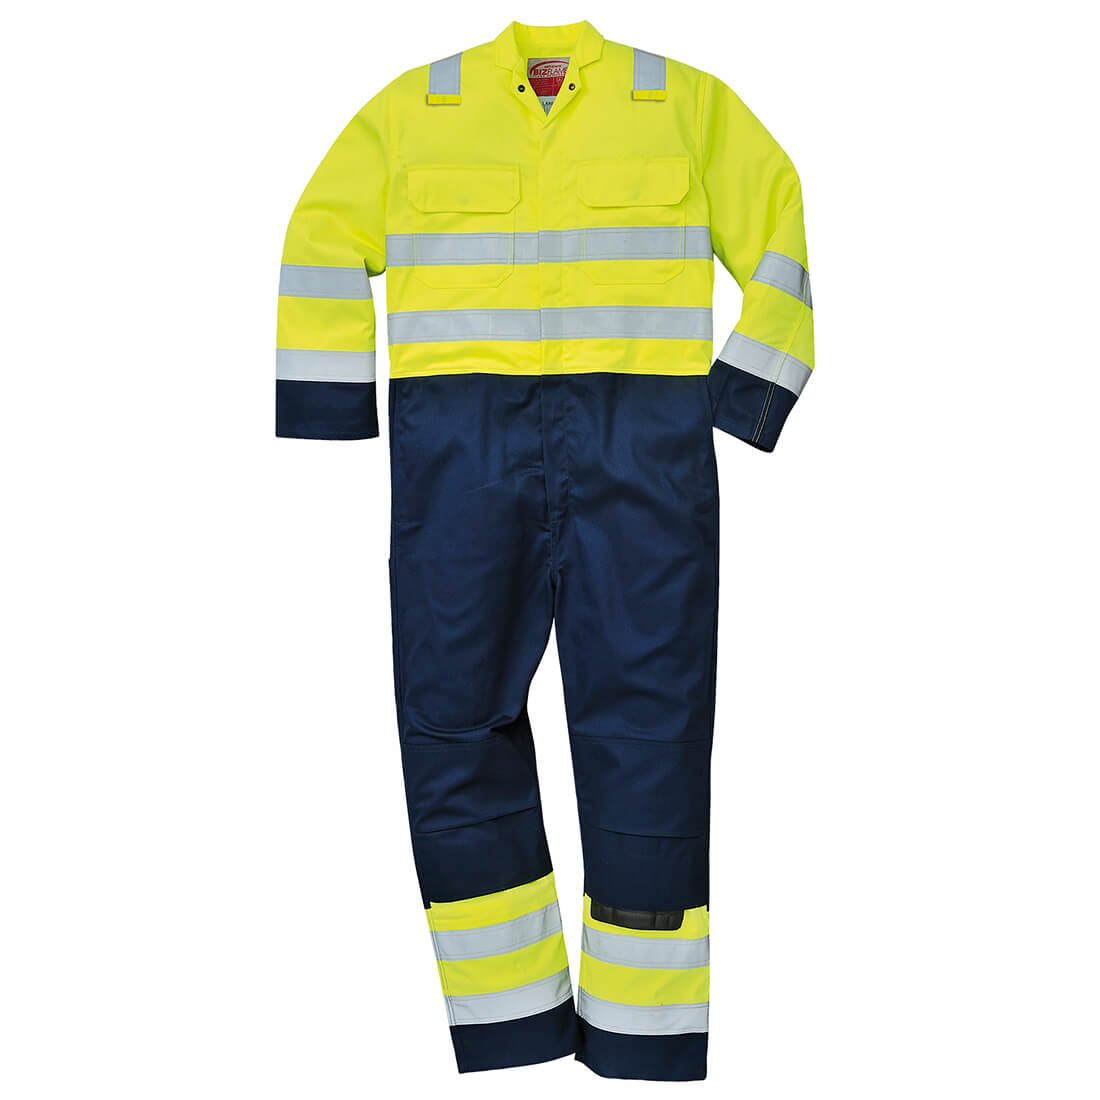 Photo of Biz Flame Pro Flame Resistant Hi Vis Coverall Yellow / Navy 4xl